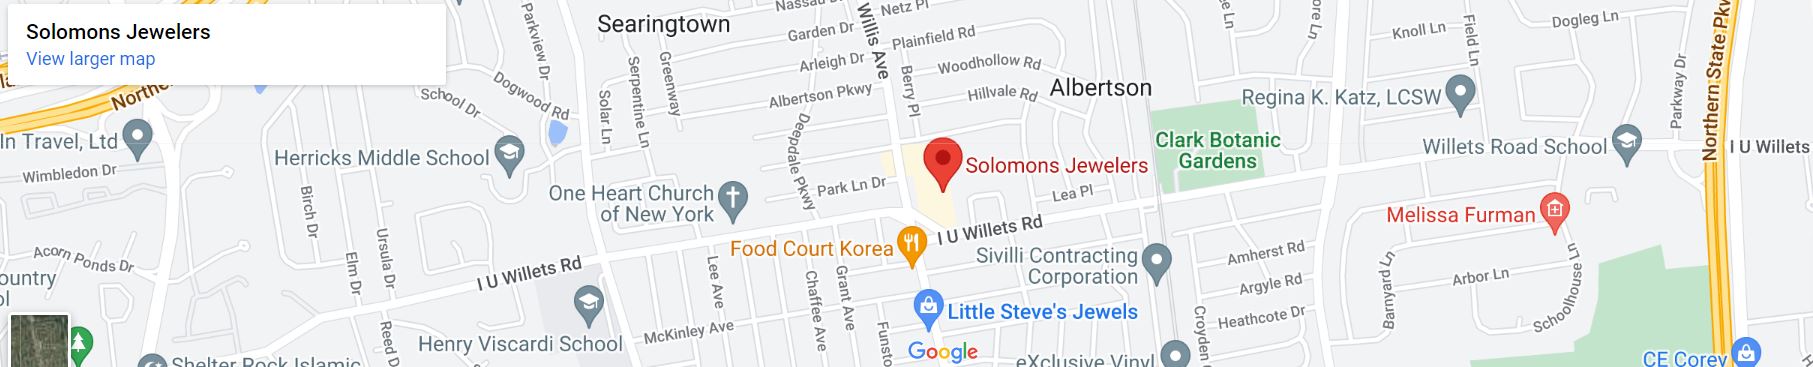 A map of the location of solomons jewelry.